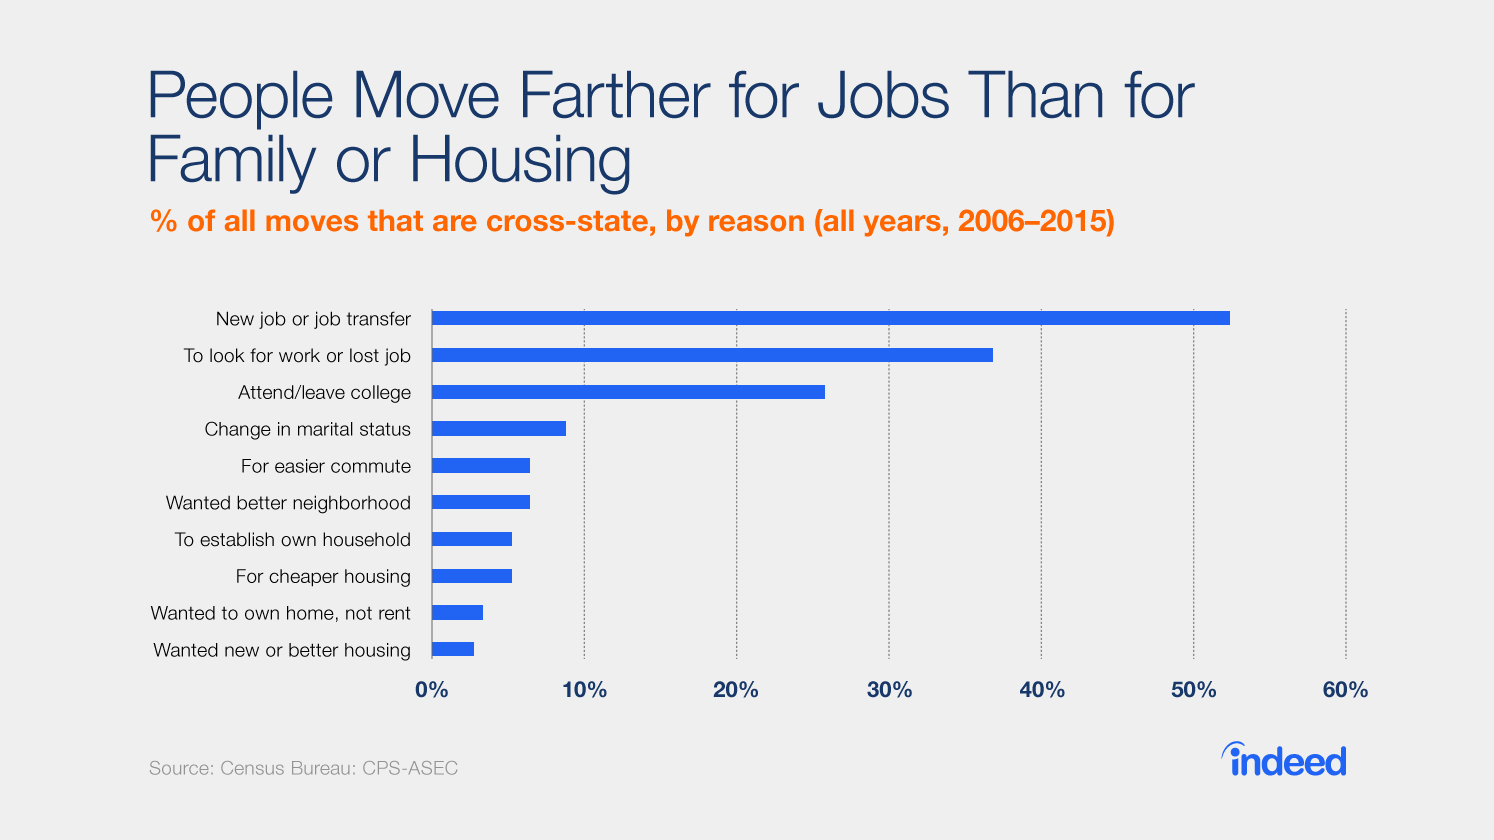 People Move Farther for Jobs Than for Family or Housing